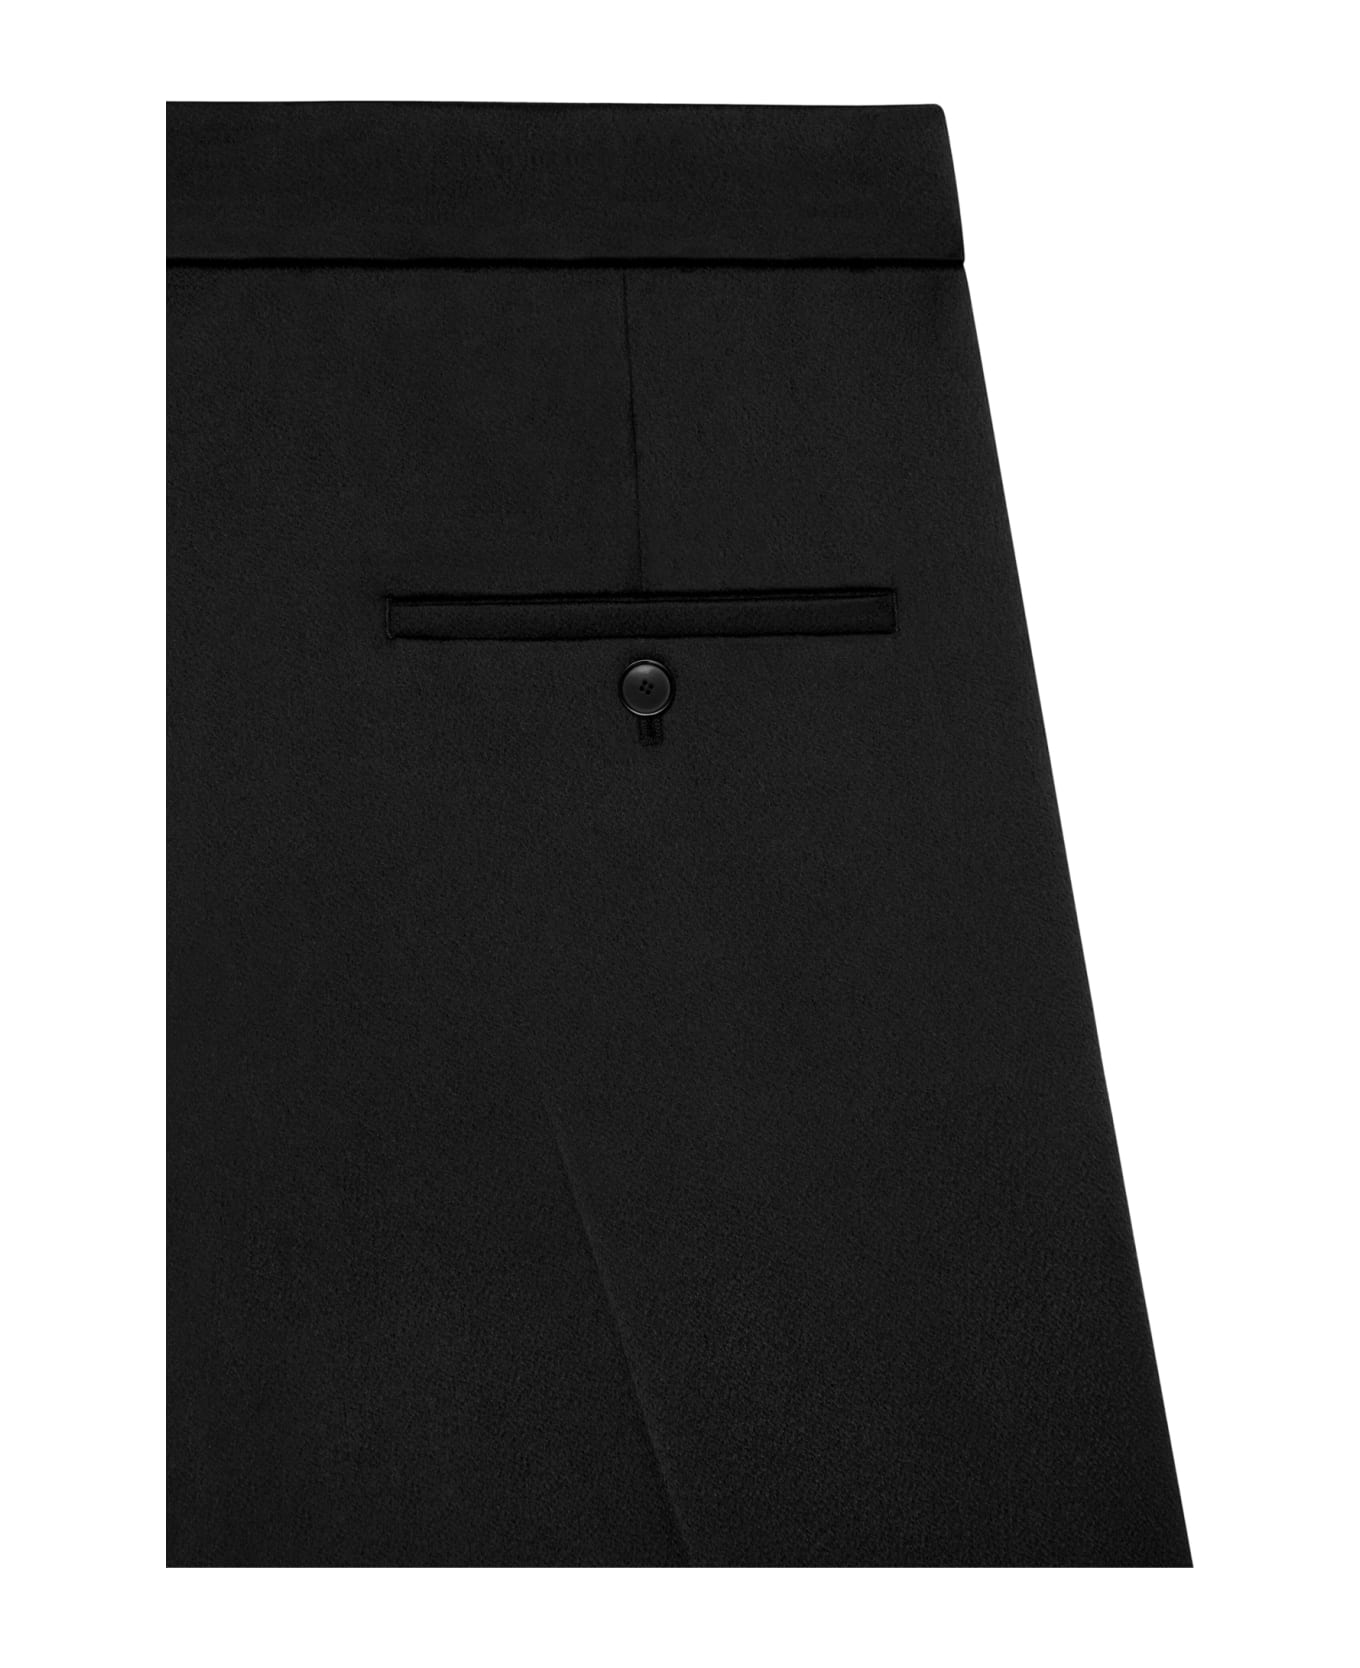 Givenchy Trousers - Black